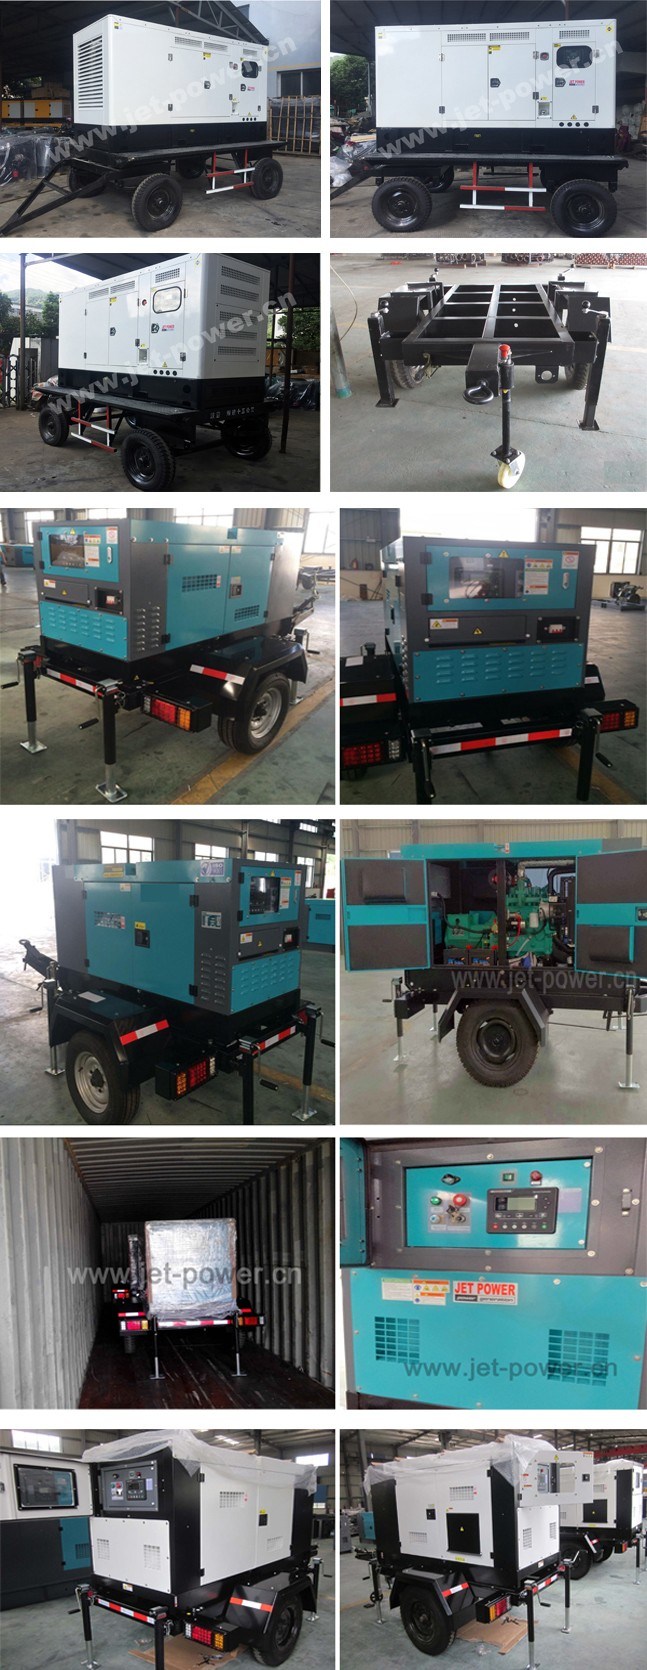 100kw Soundproof Electrical Diesel Generator with Circuit Breaker Spare Parts